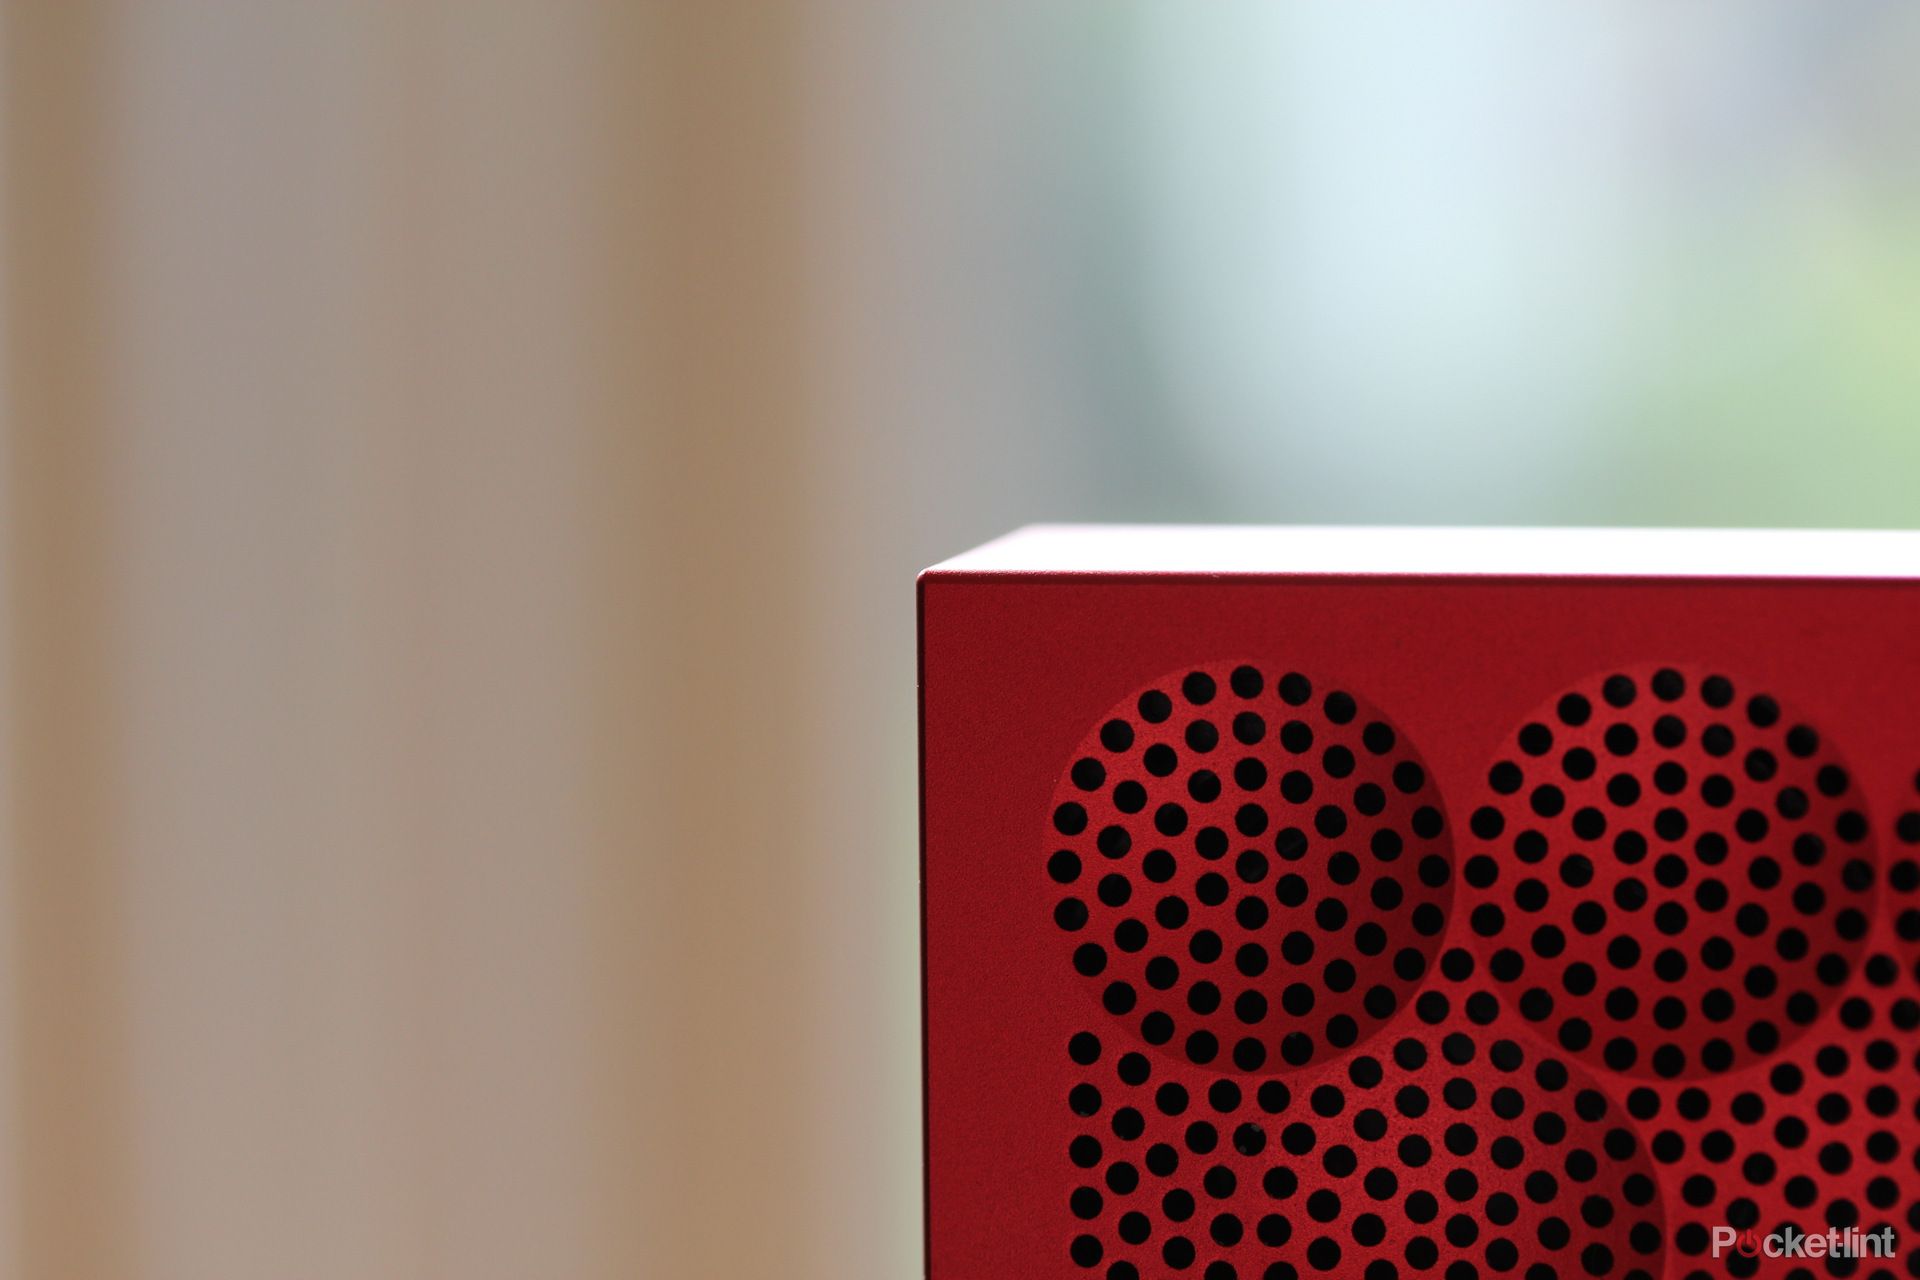 jawbone mini jambox big sound small package video and pictures image 8